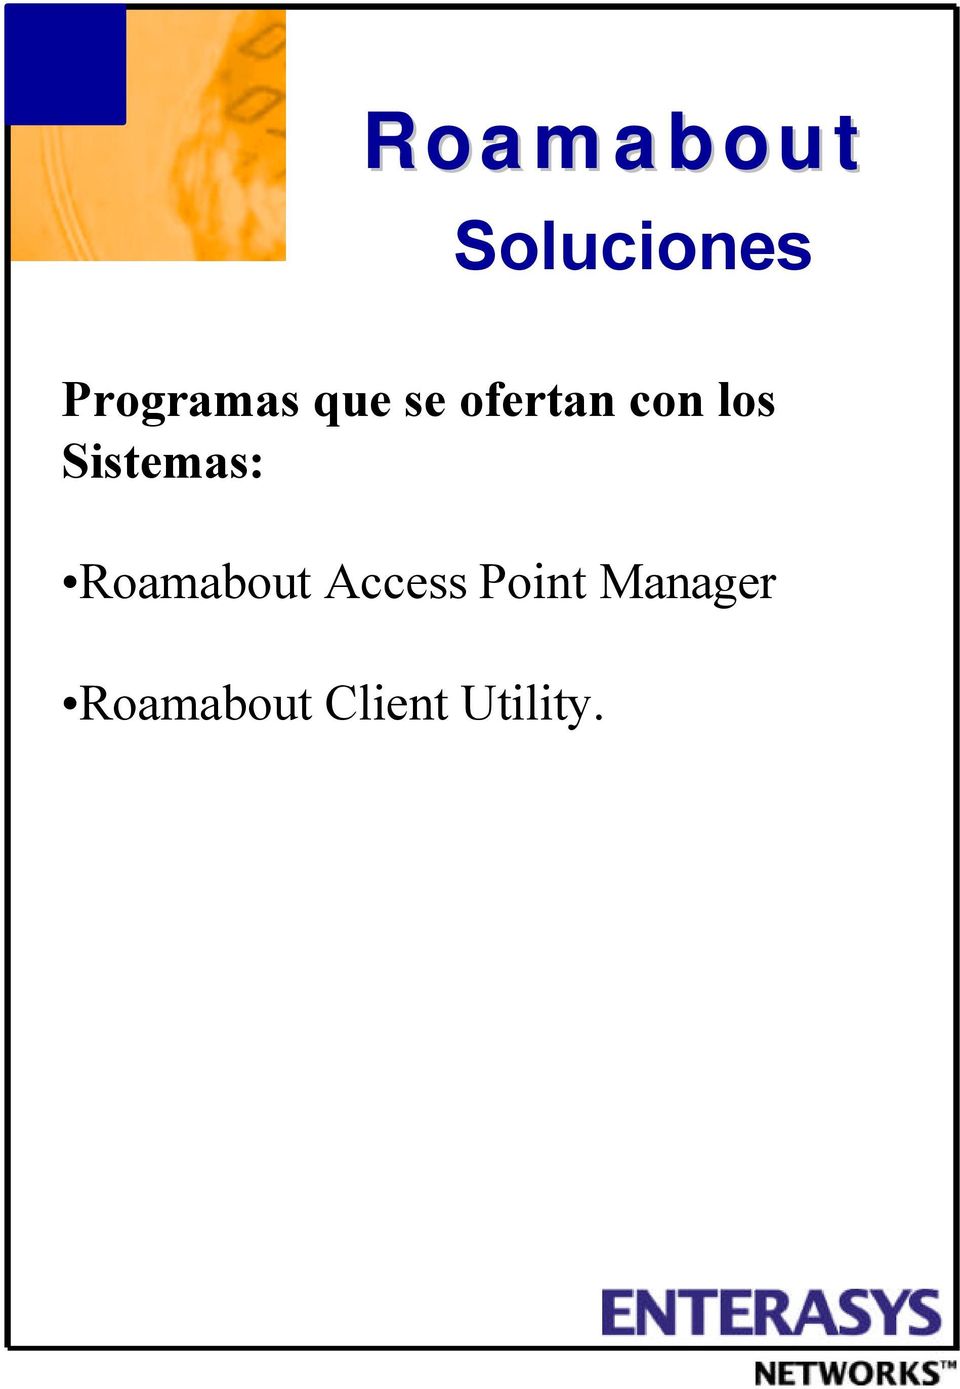 Roamabout Access Point